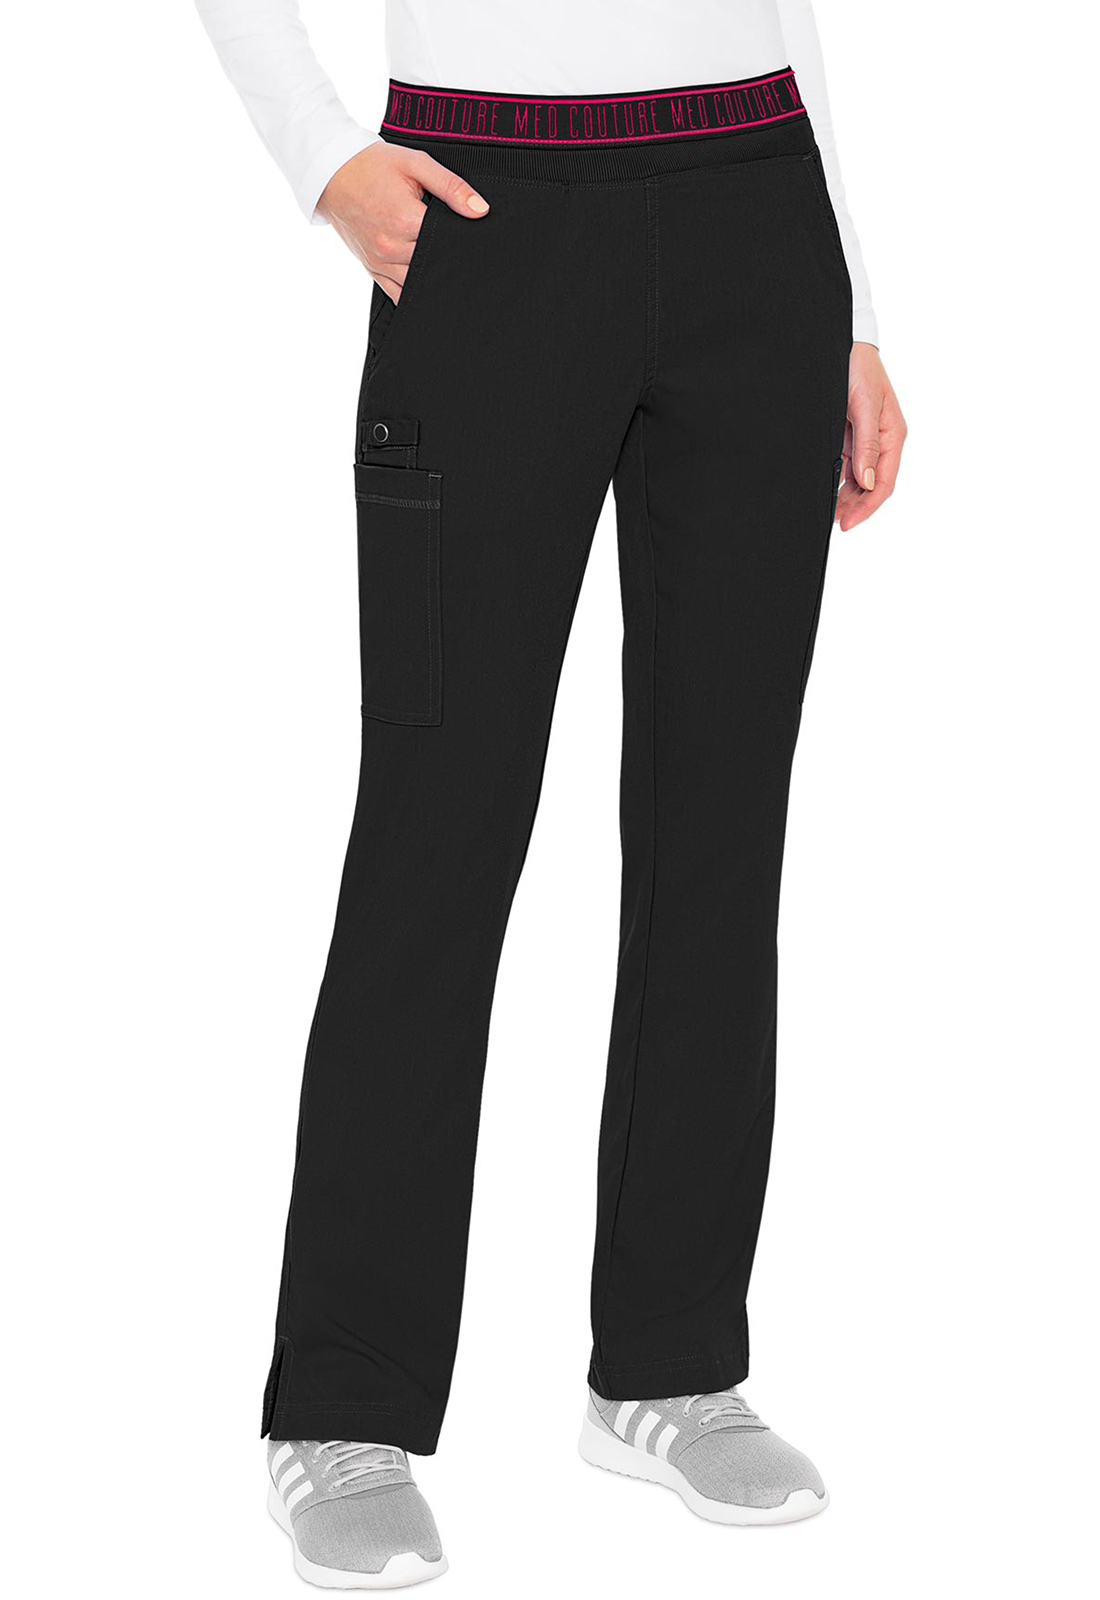 Med Couture MC Touch Yoga 2 Cargo Pocket Pant-